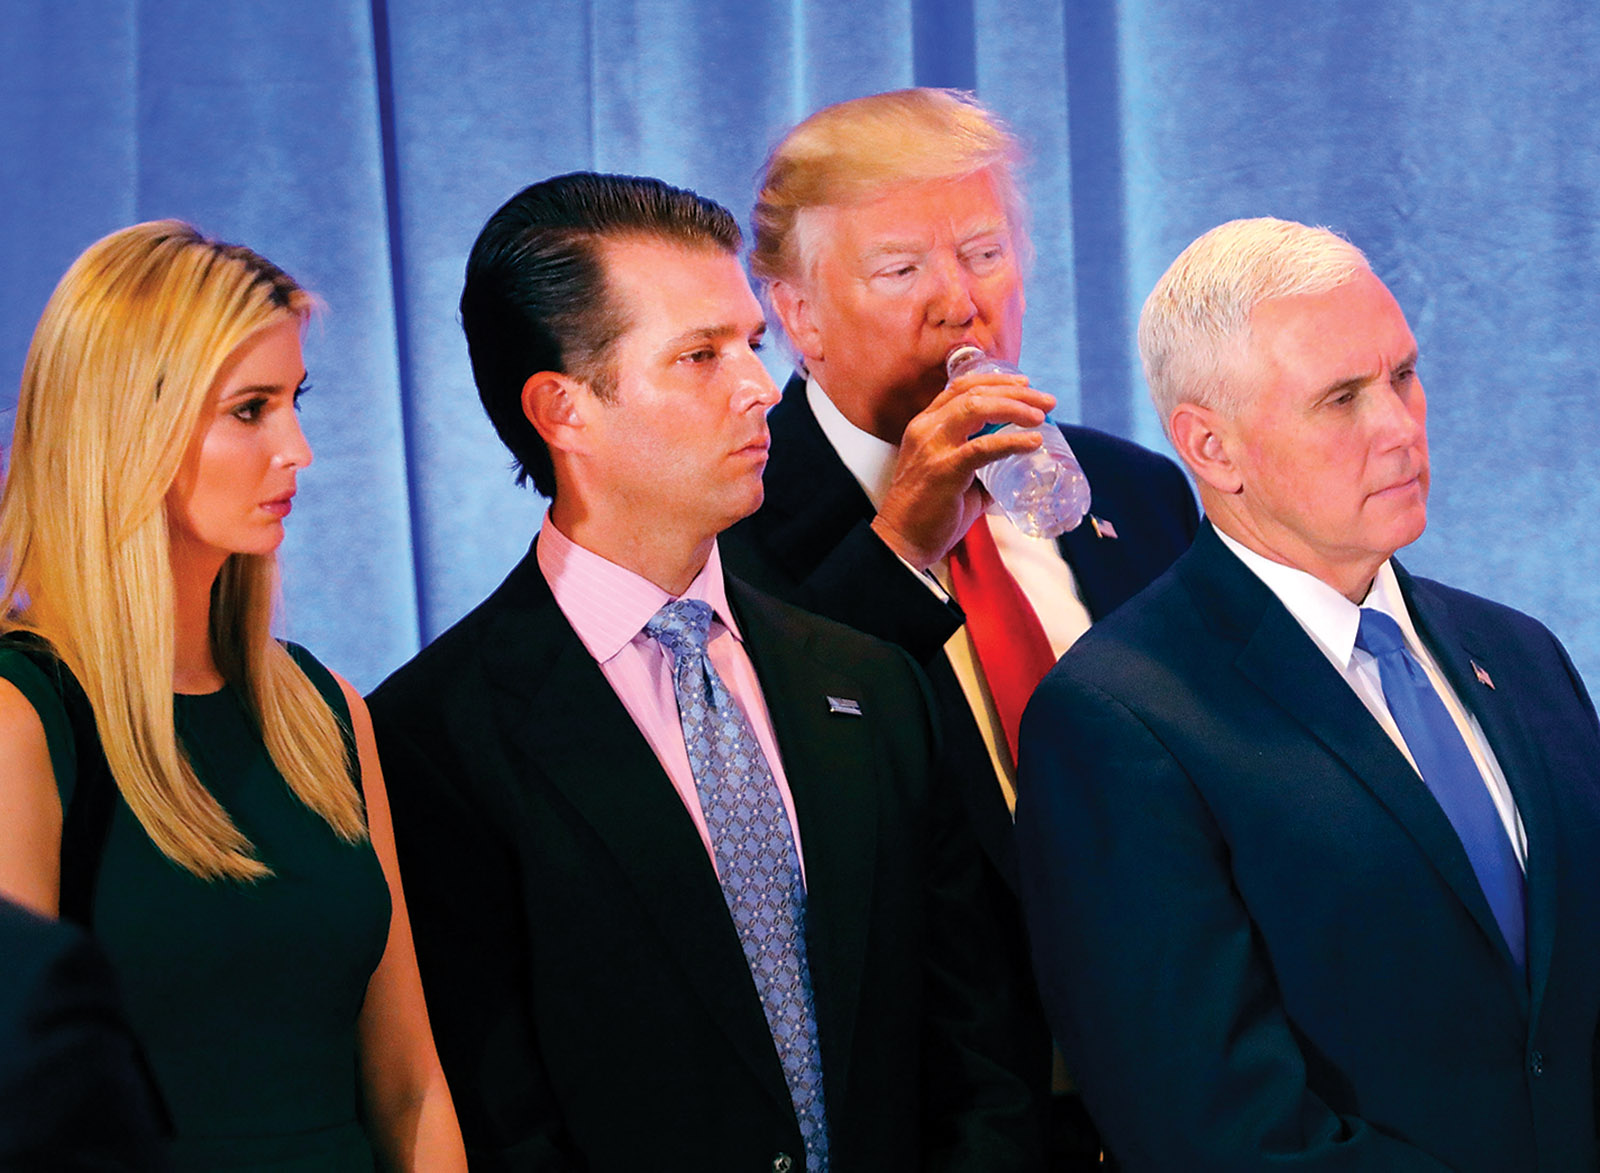 President-elect Donald Trump with Ivanka Trump, Donald Trump Jr., and Vice President–elect Mike Pence at a news conference at Trump Tower, New York City, January 2017